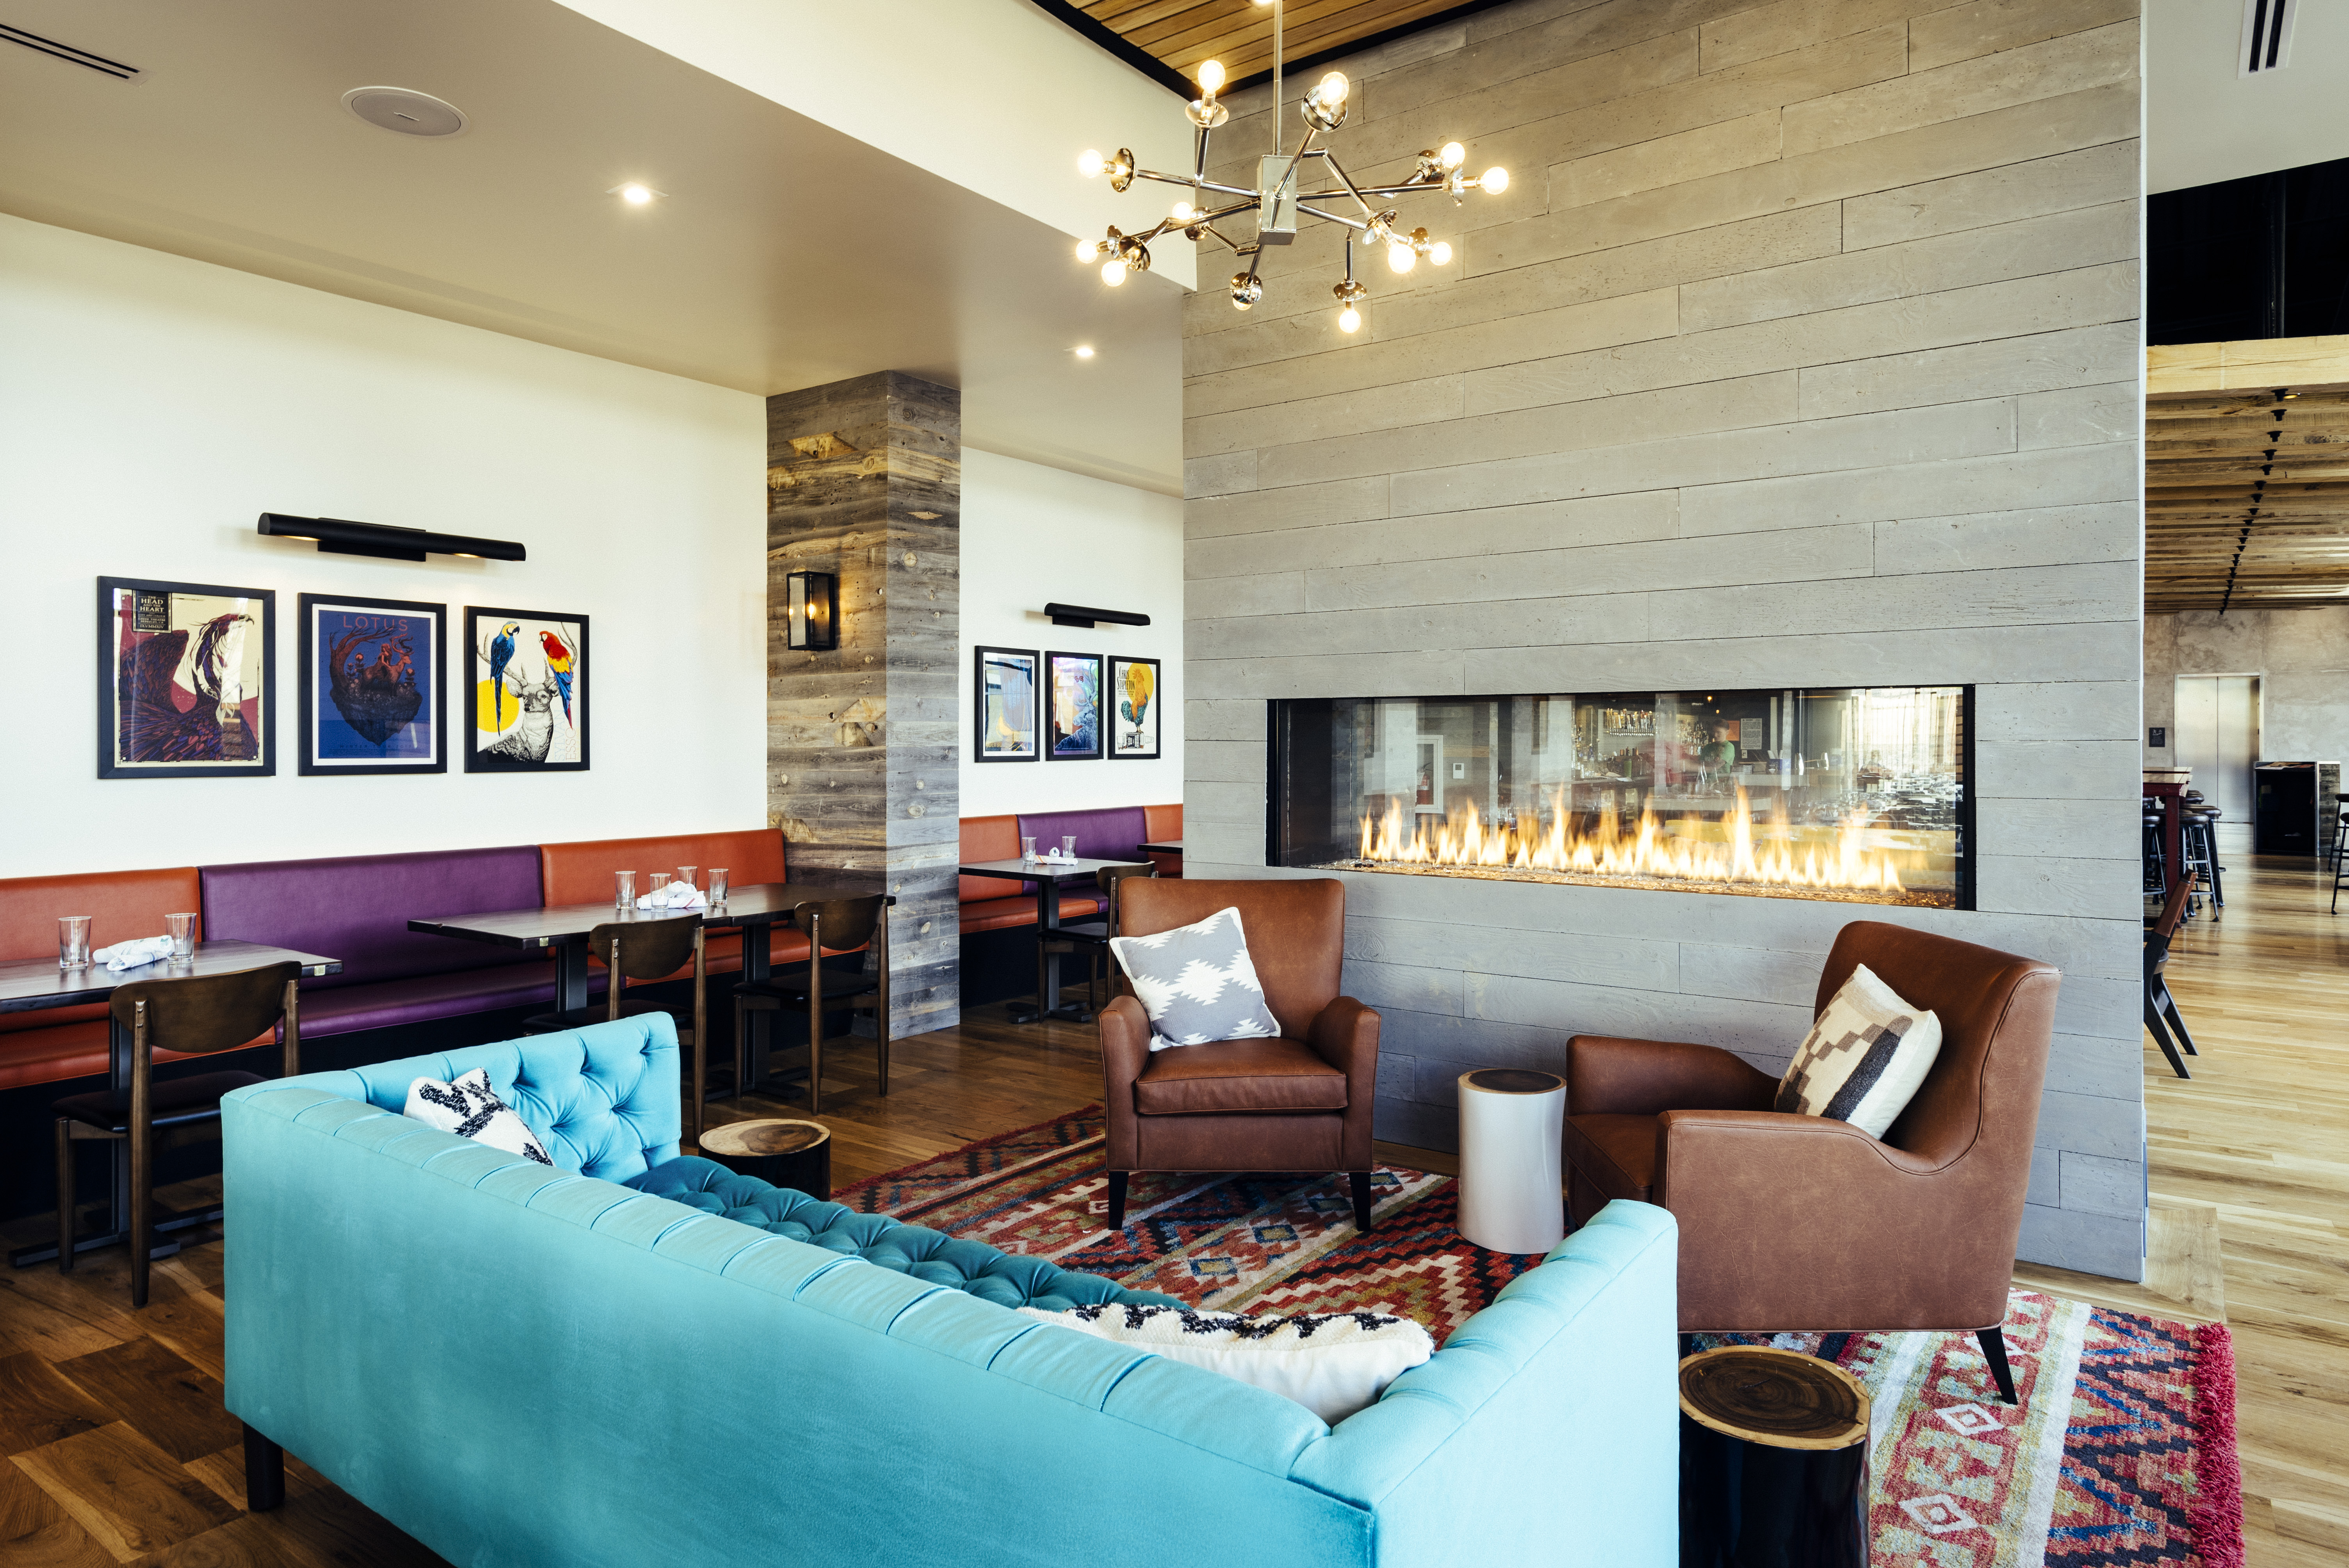 large open space with living room couches of different colors and a fireplace surrounded by glass